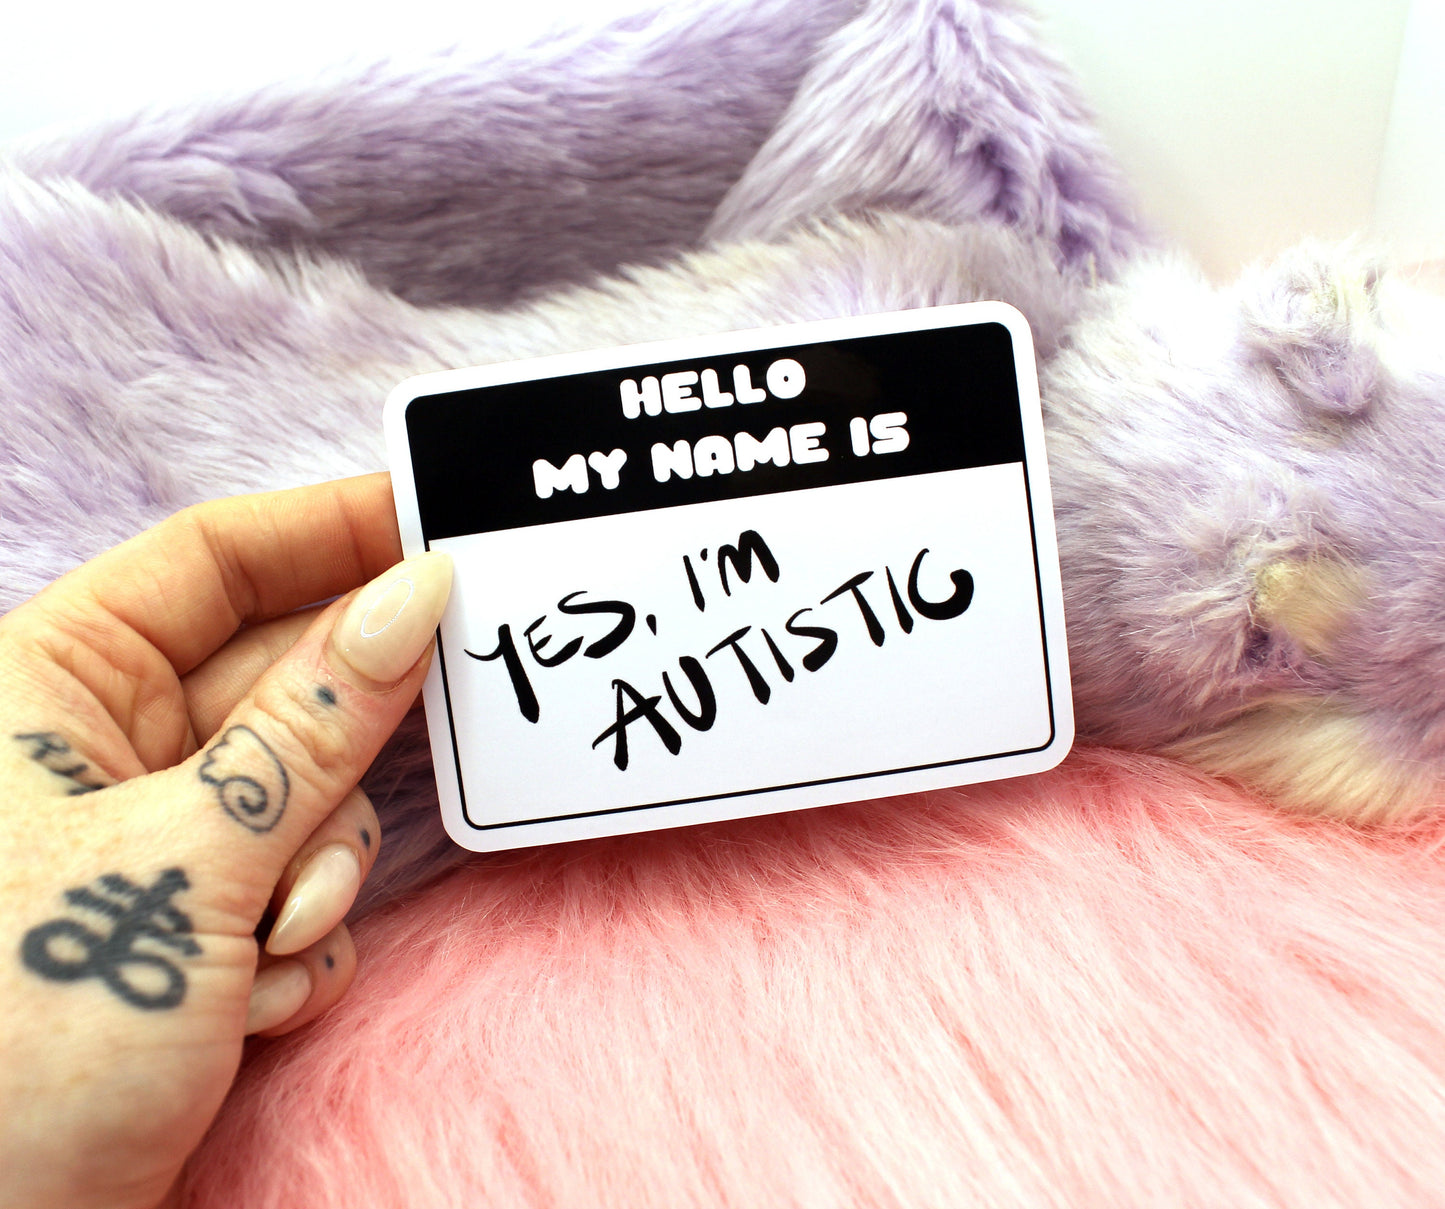 Hello, My Name is Yes, I'm Autistic Sticker (8cm)